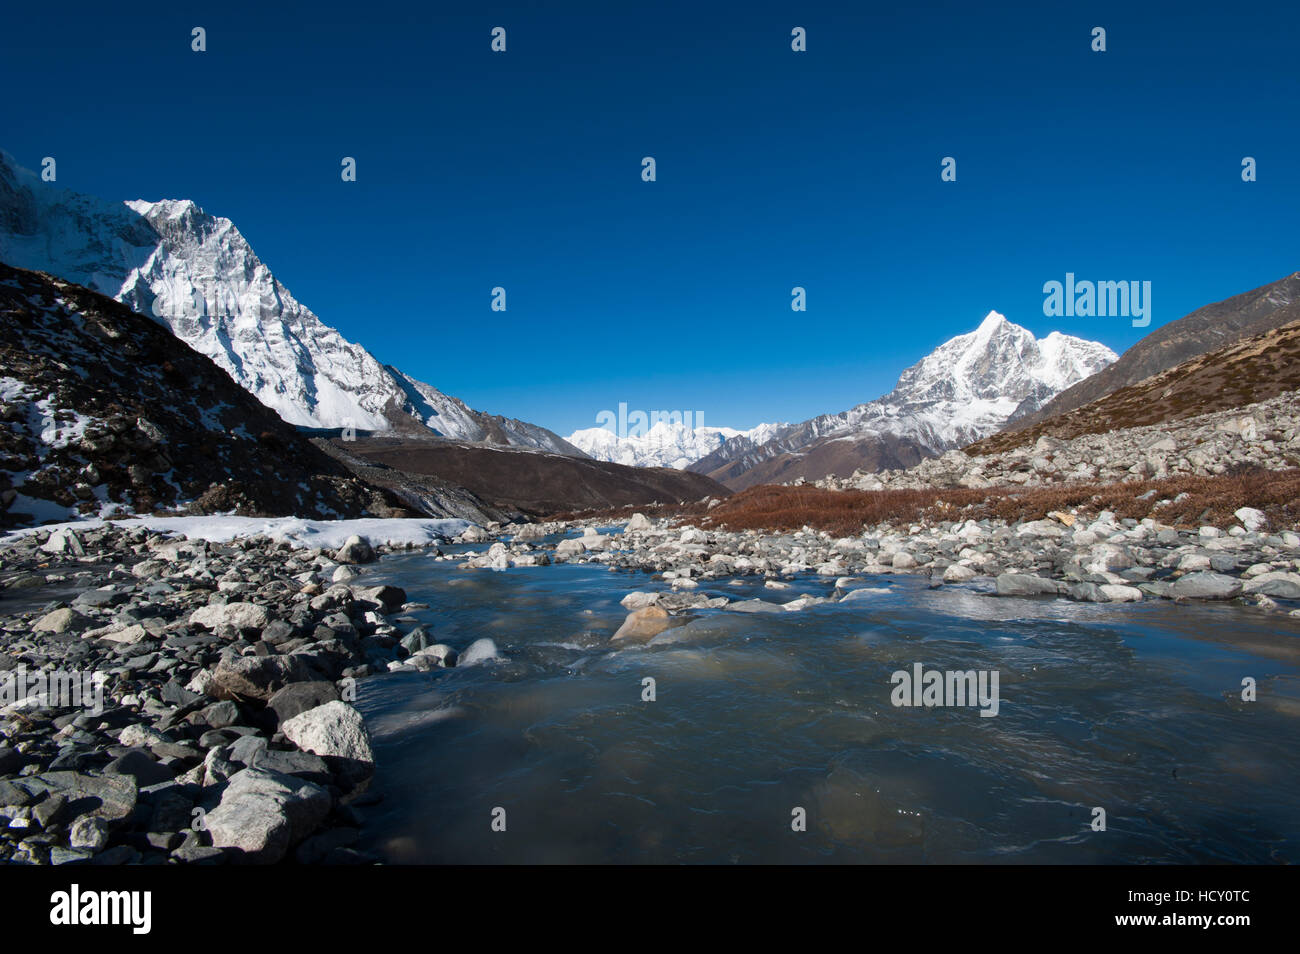 Icy meltwater flows down the Chekhung valley with views of Ama Dablam to the left and Taboche to the right, Khumbu Region, Nepal Stock Photo